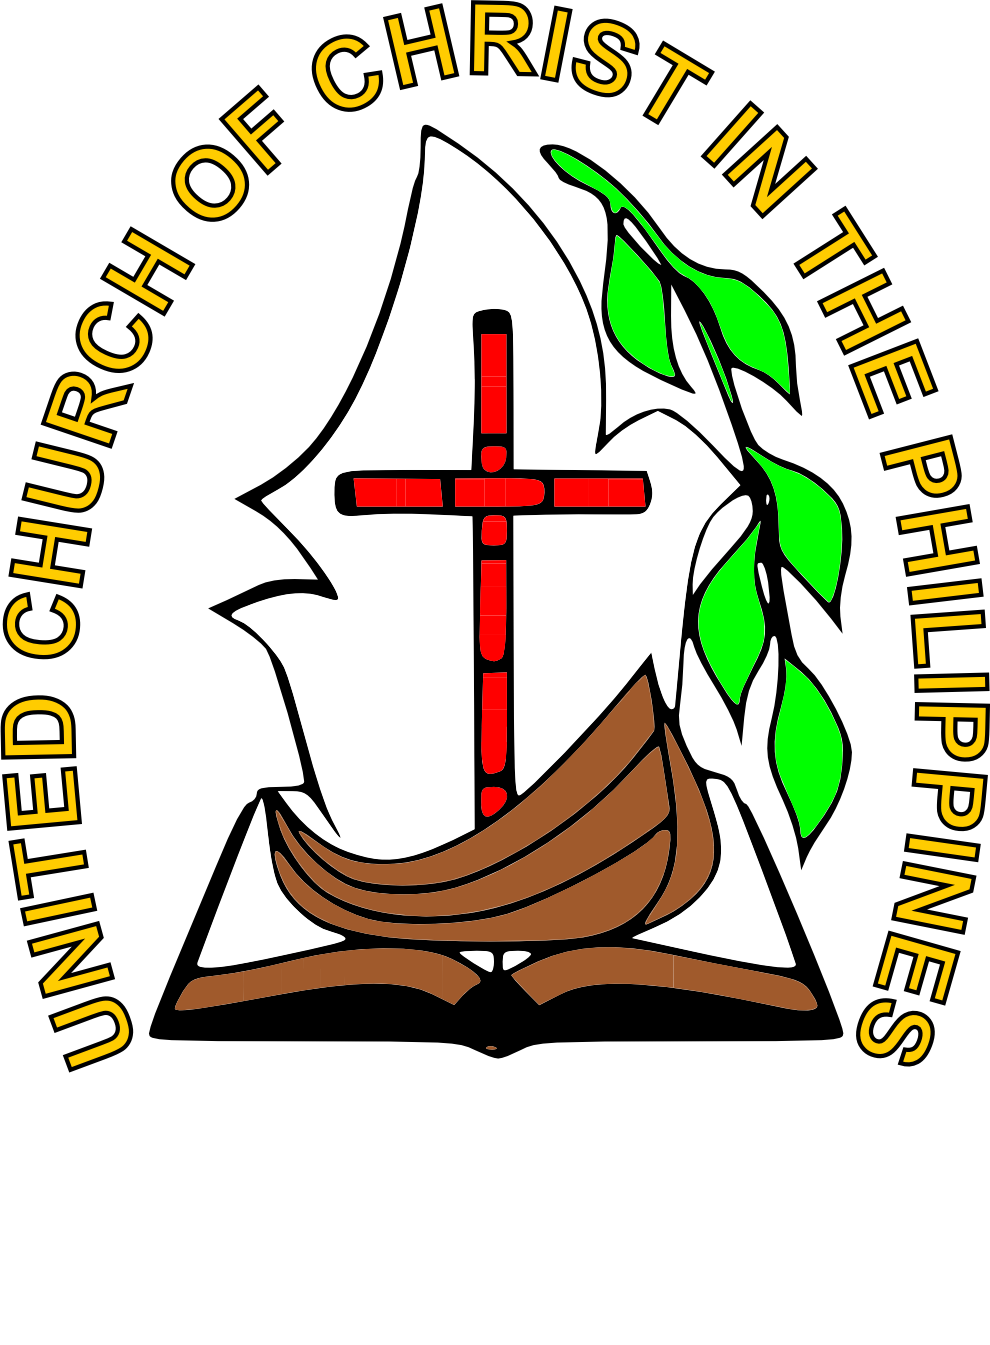 United Church of Christ in the Philippines logo